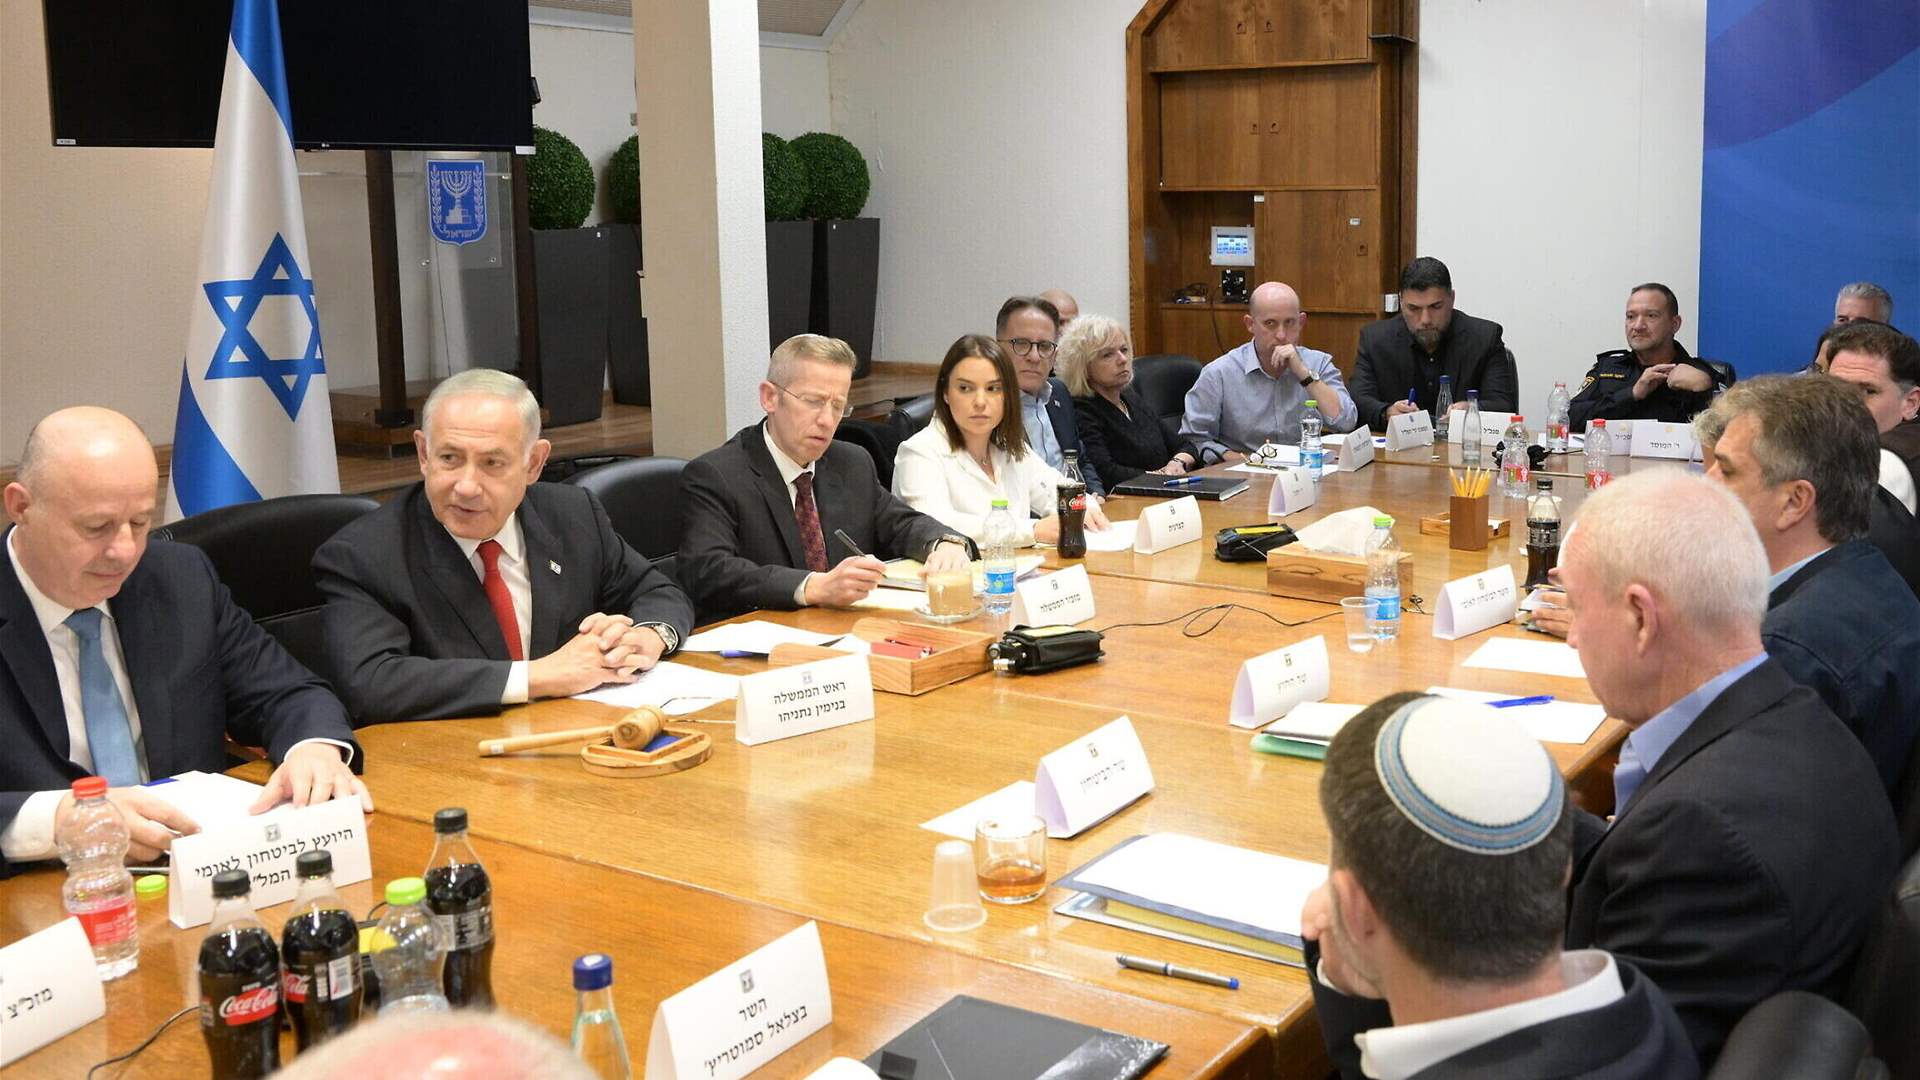 Latest details about the meeting of Israeli war cabinet regarding Lebanon